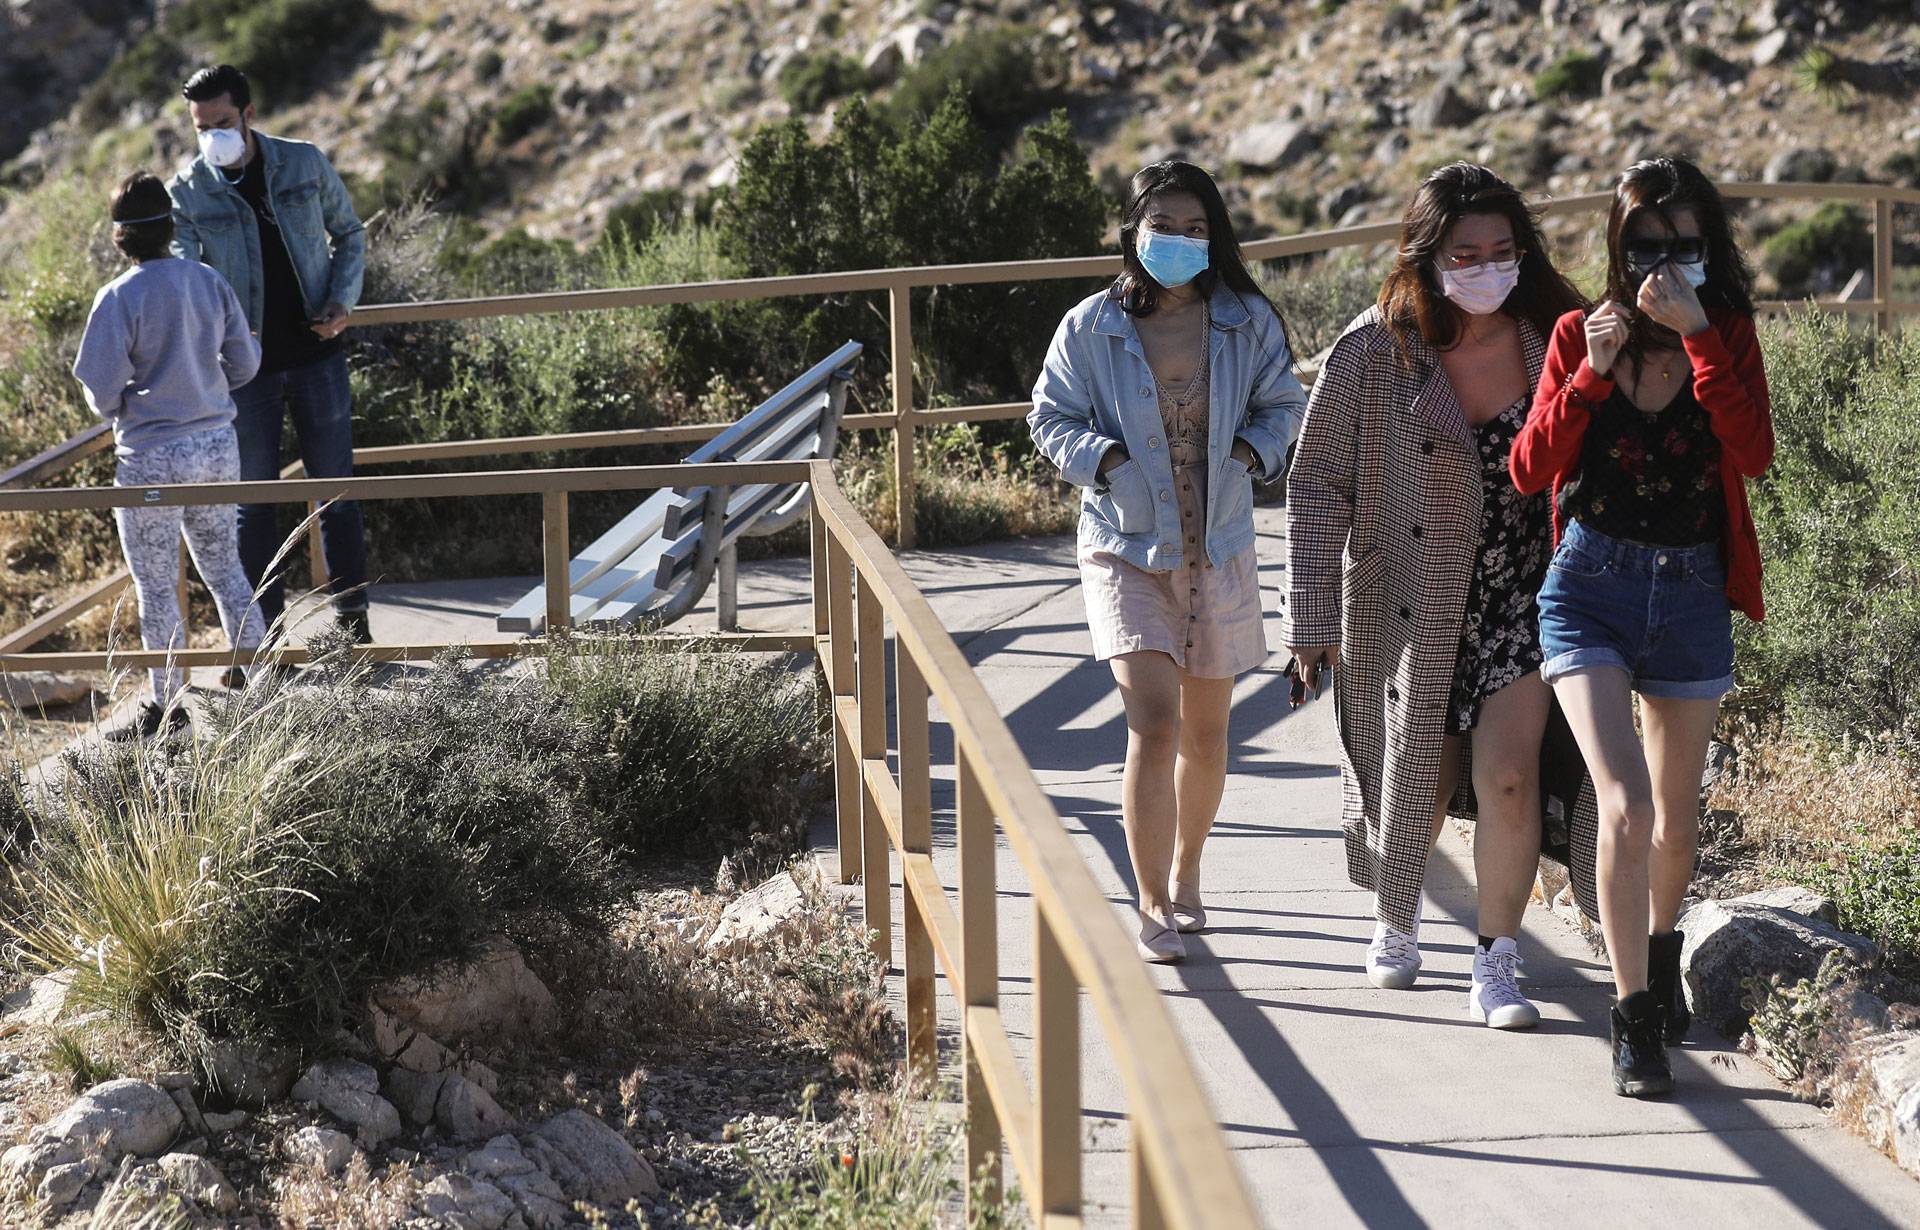 Visitors wear face masks on a walking path in Joshua Tree National Park on May 18, one day after the park reopened after being closed due to the coronavirus pandemic. Mario Tama/Getty Images